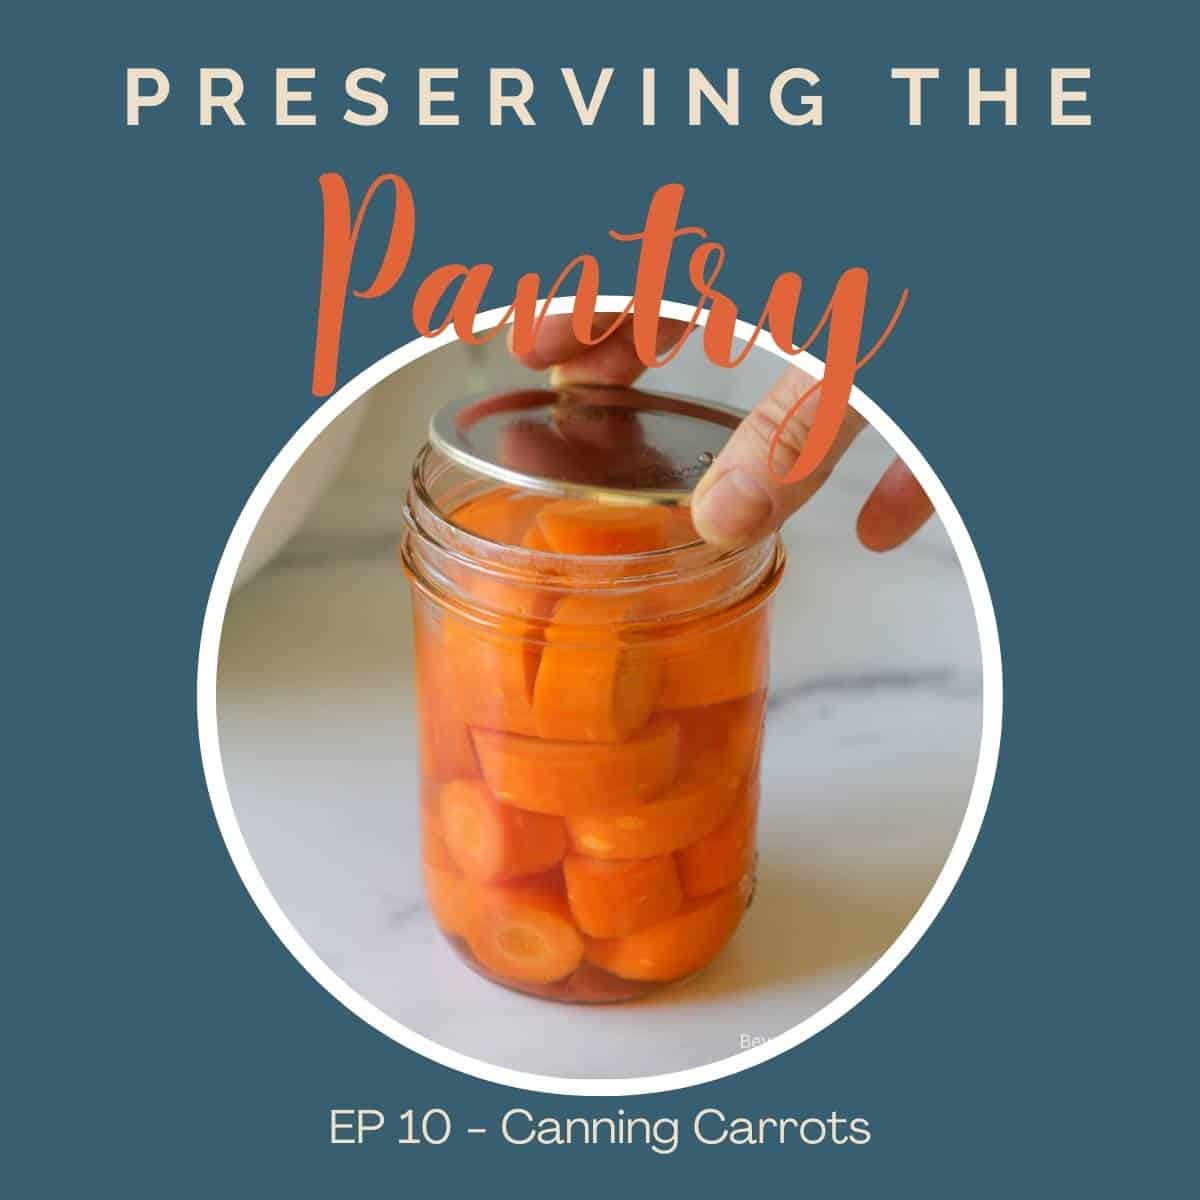 A canning jar filled with sliced carrots. 